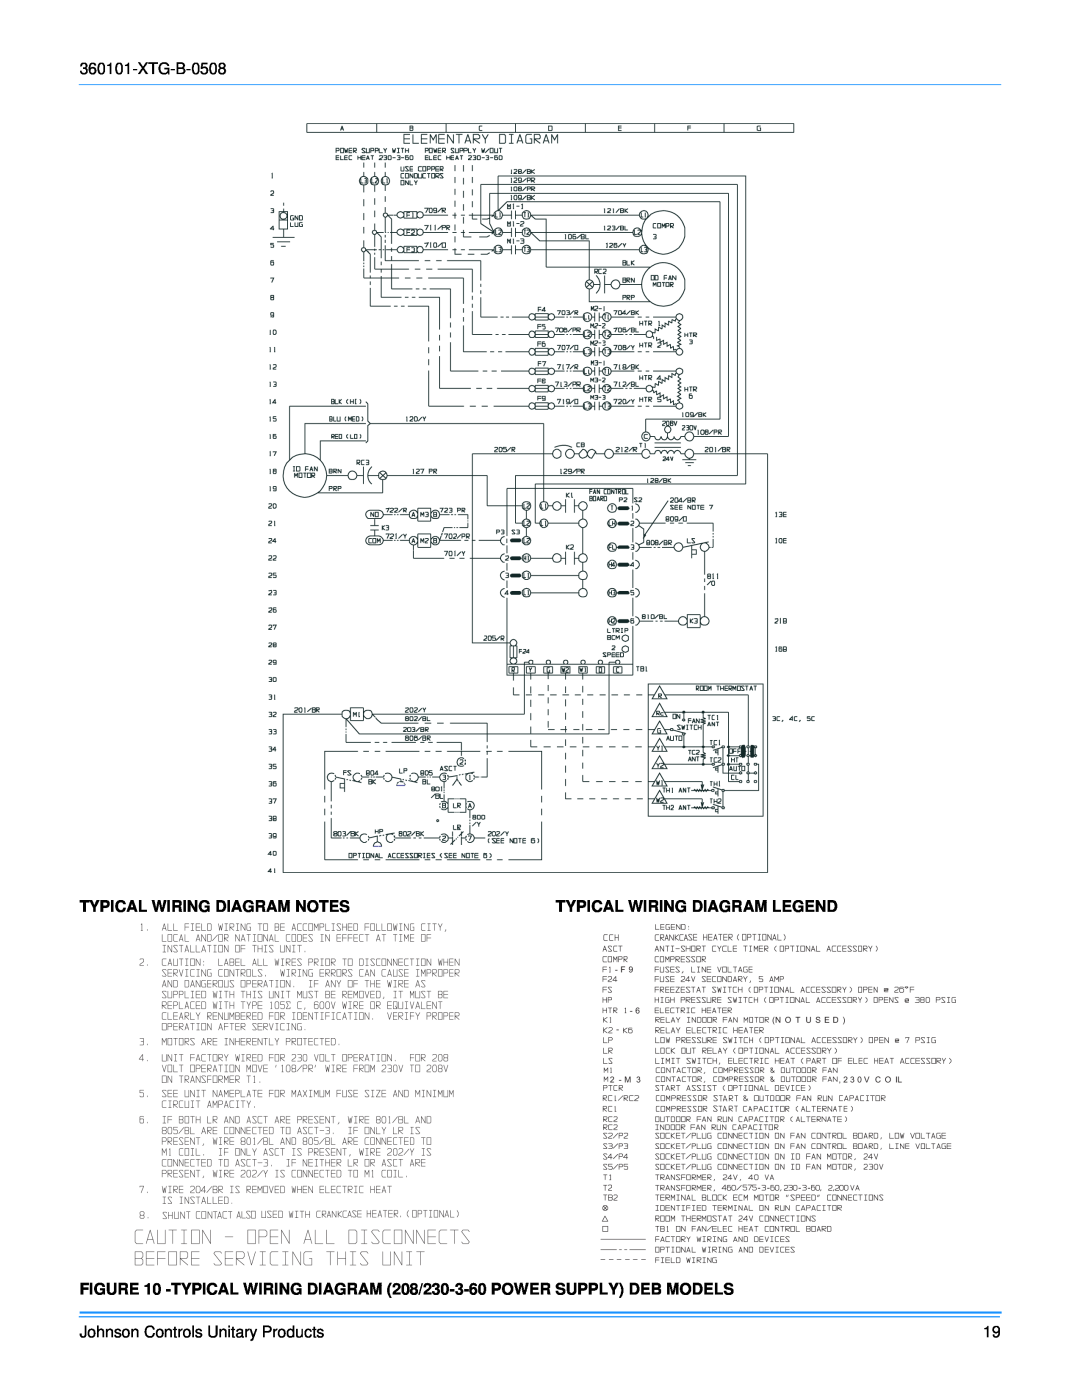 York D2EB030 manual Typical Wiring Diagram Notes, Typical Wiring Diagram Legend, N O T U S E D, 2 - M, 2 3 0 V C O IL 